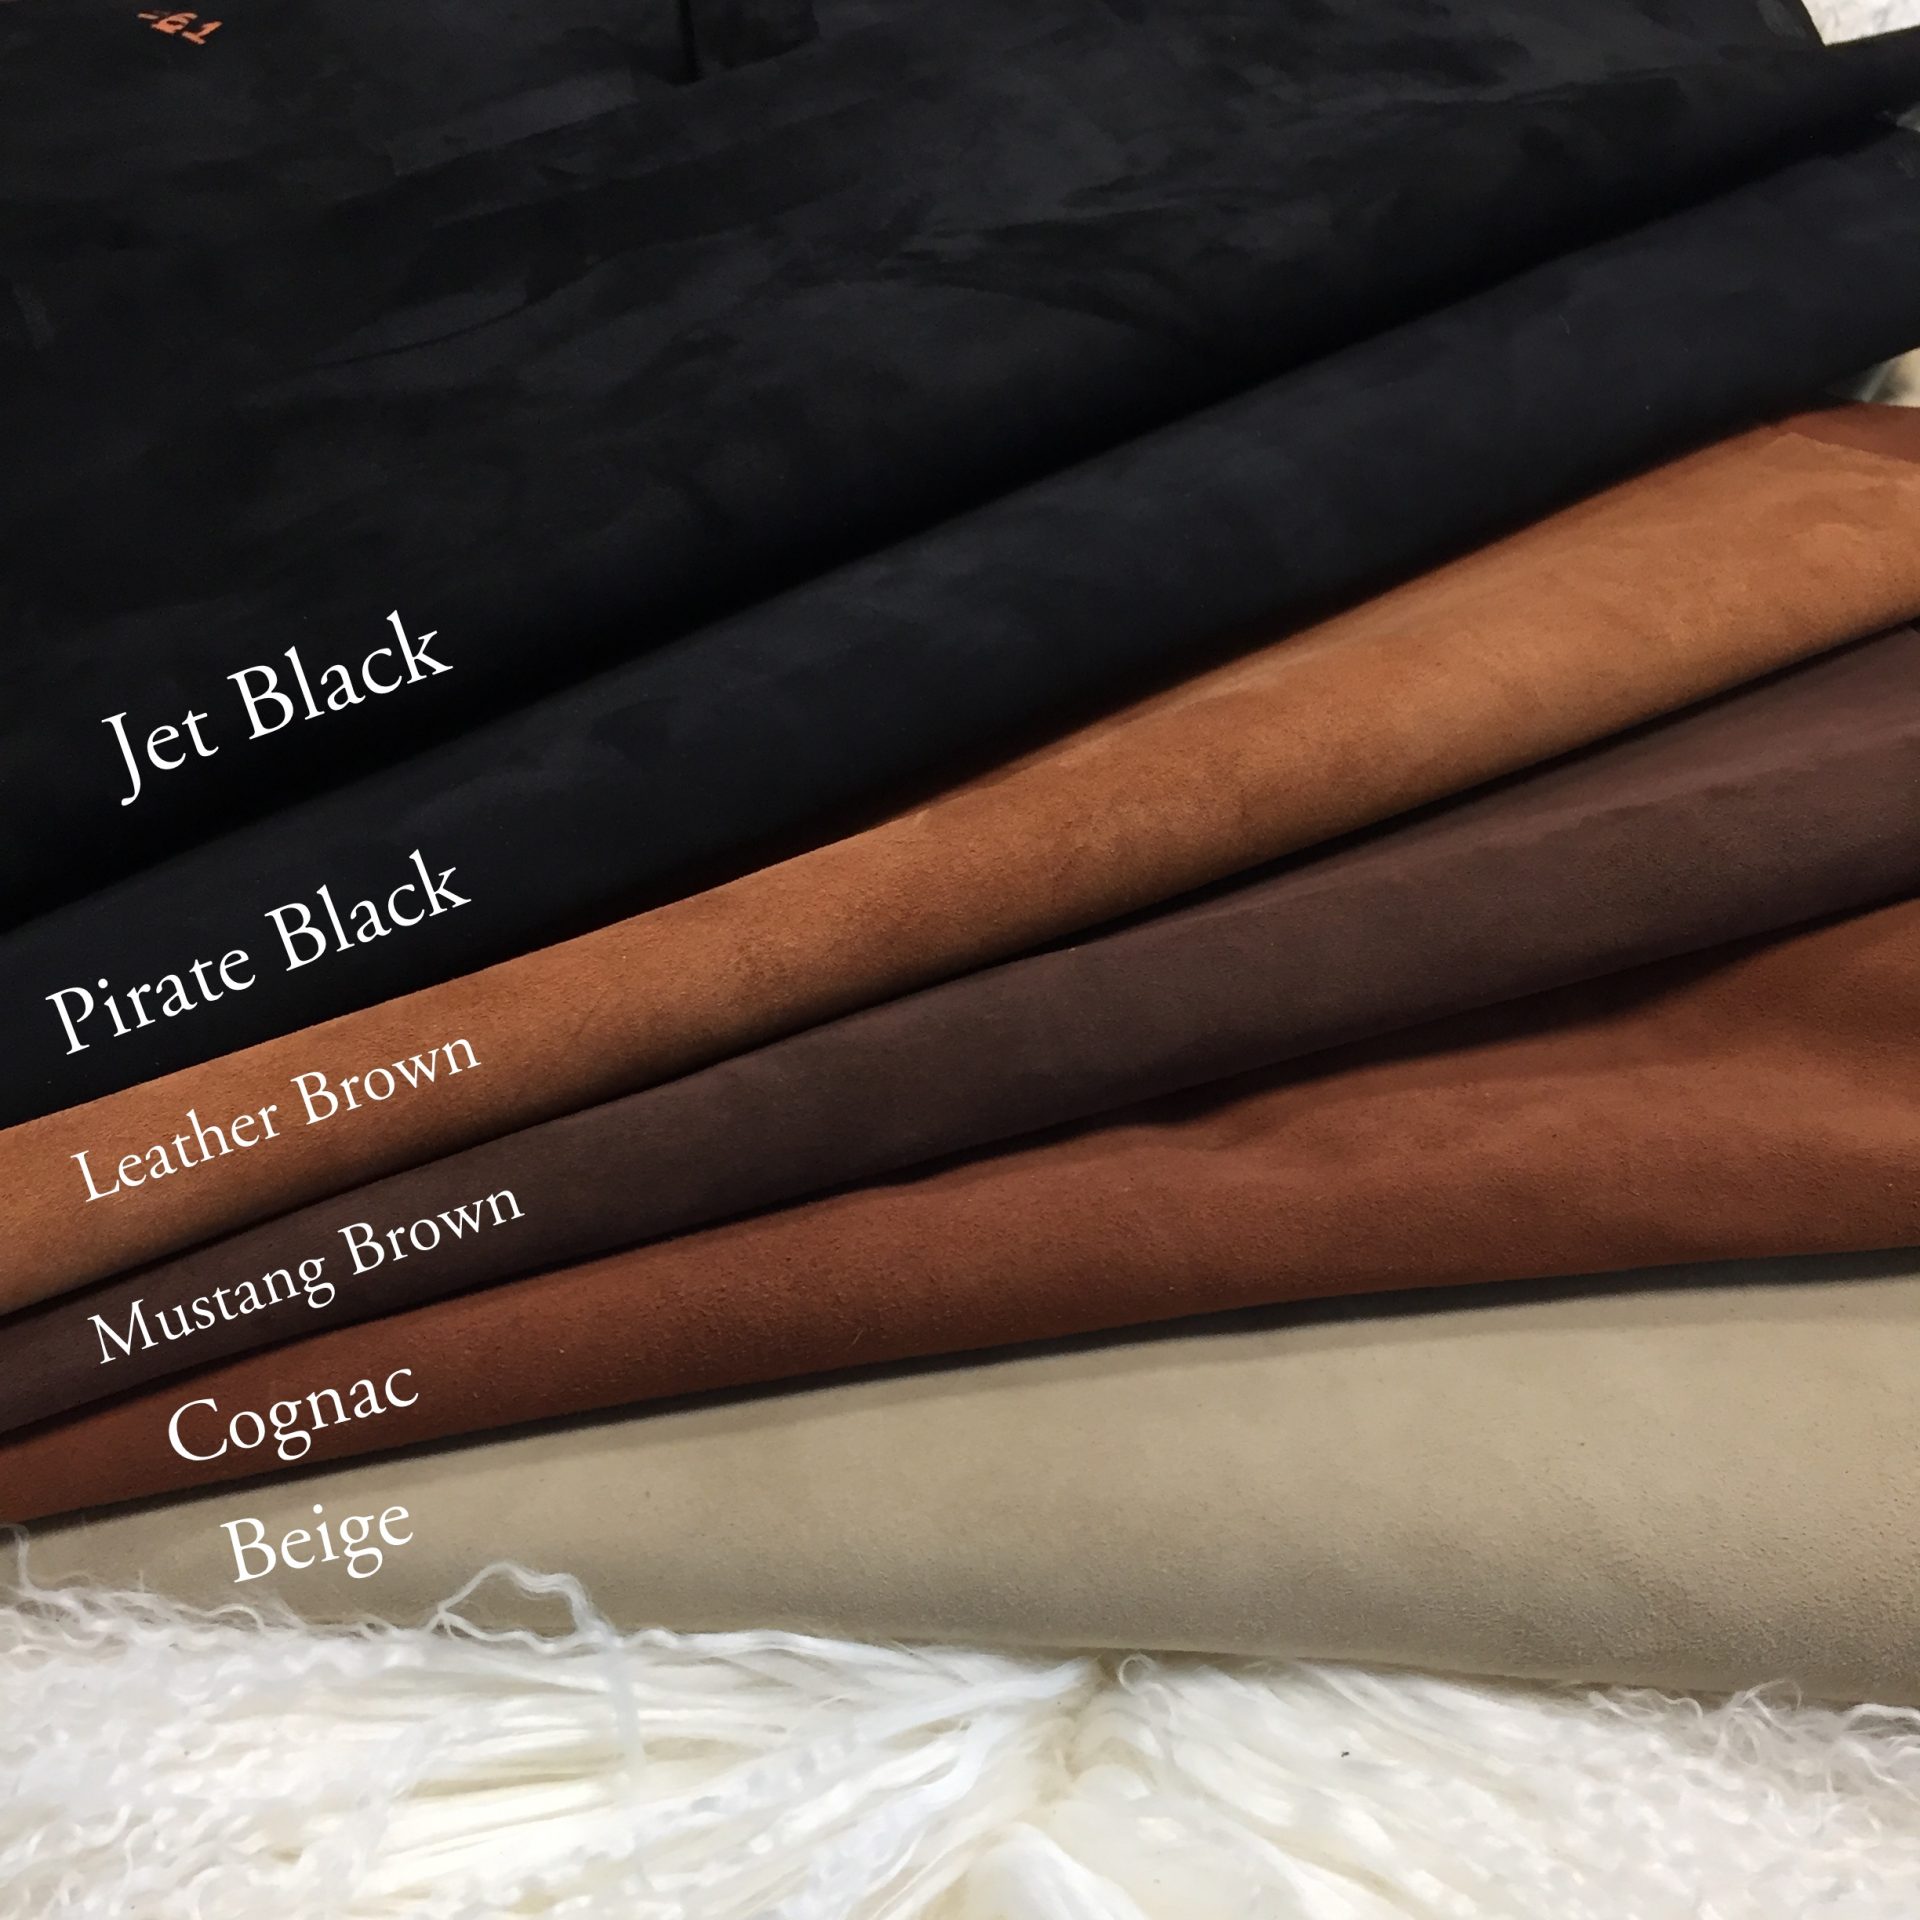 What Is Suede Leather? Learn All About Suede Leather Guide!